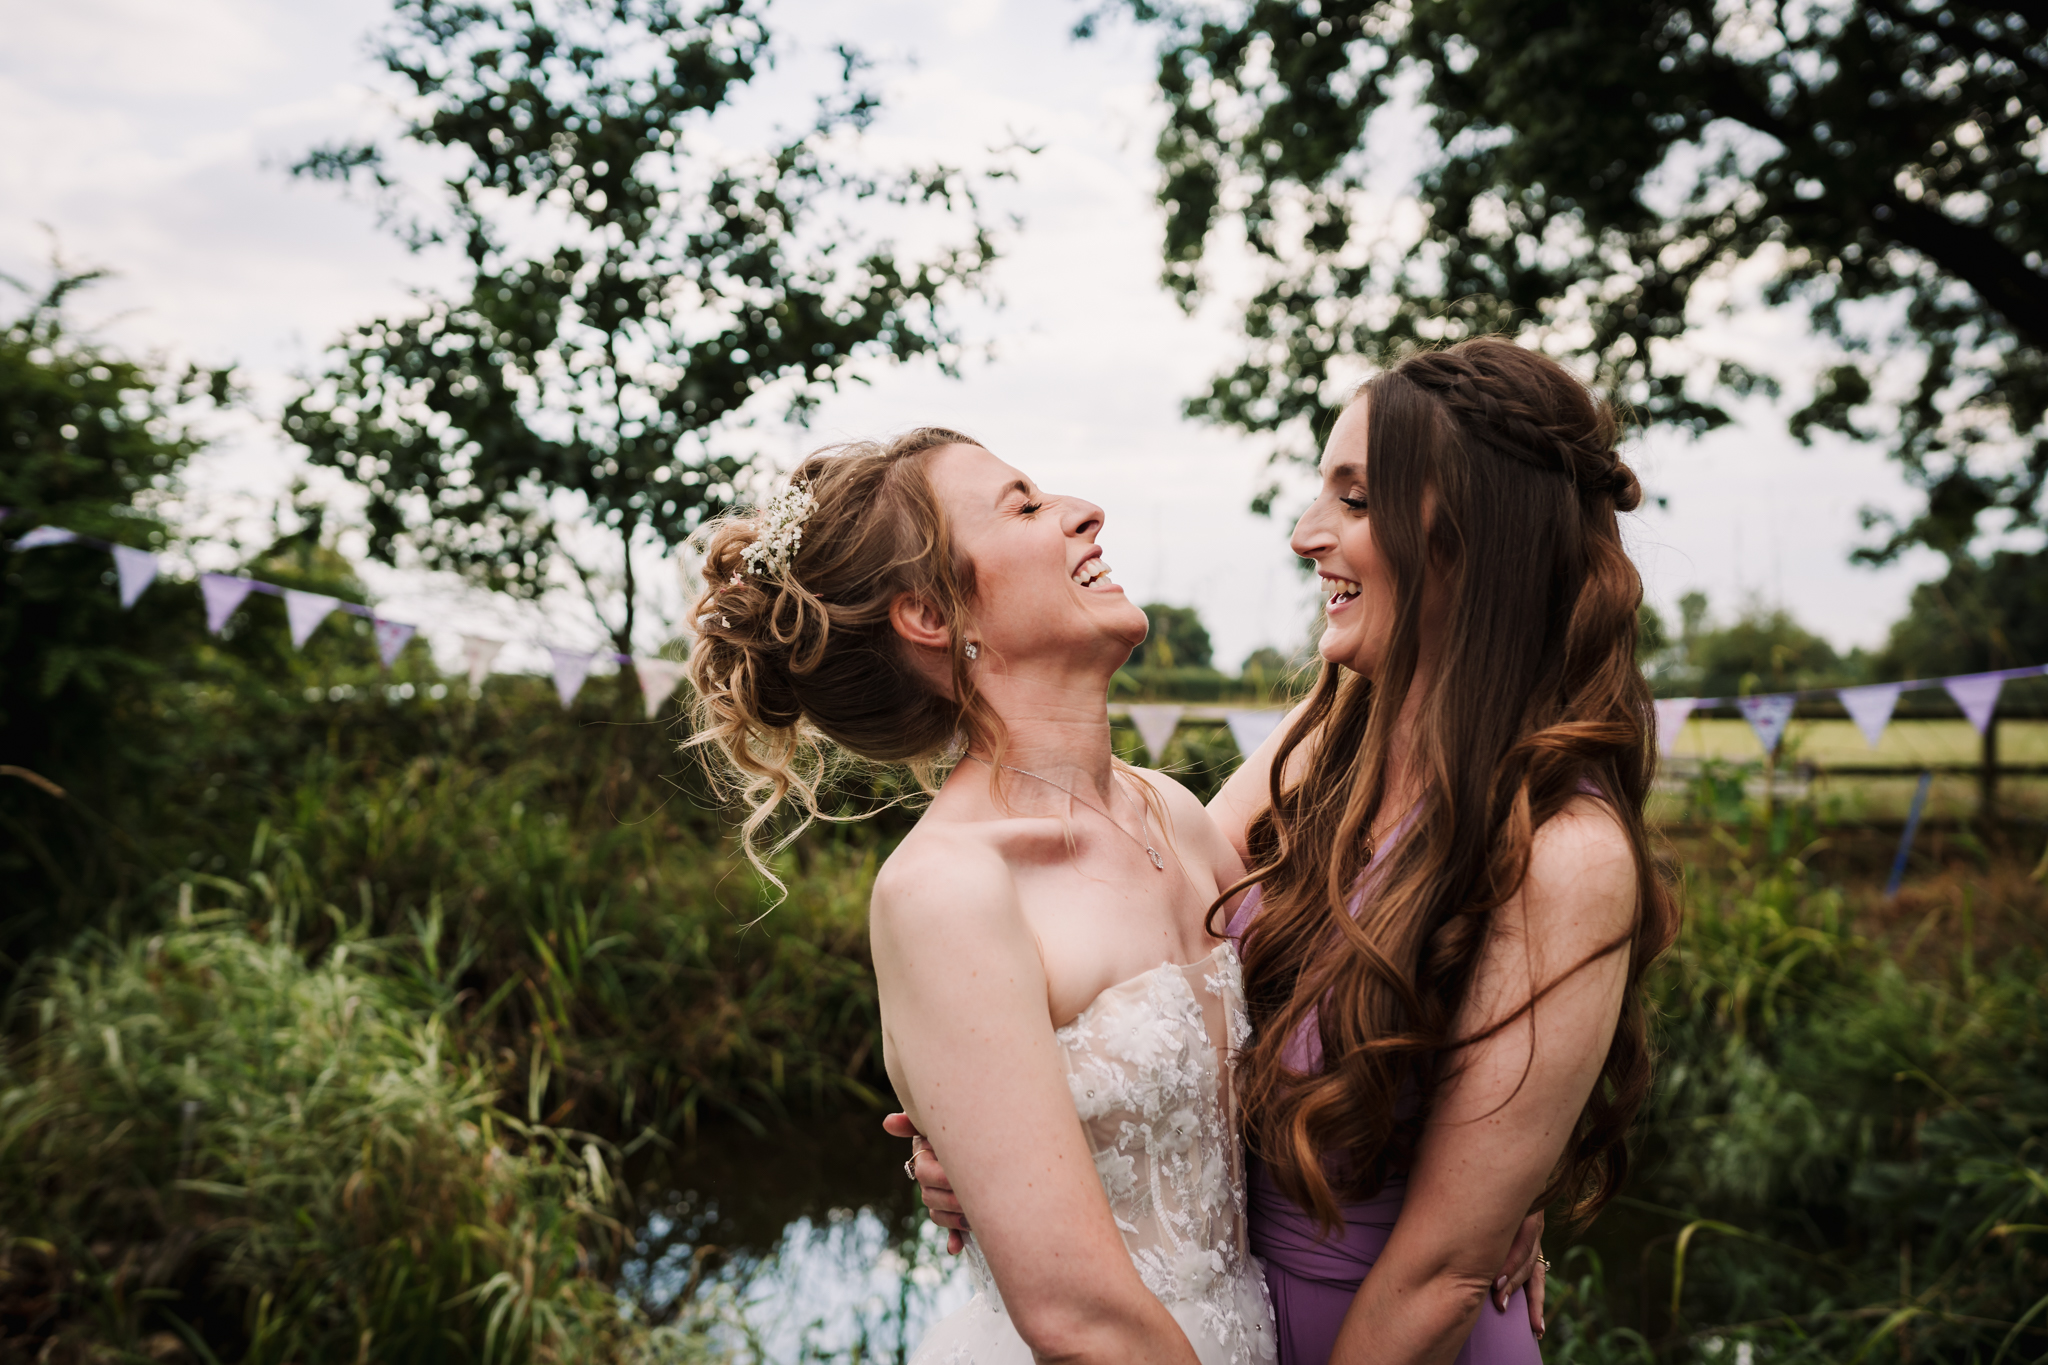 bride and her bridesmaid share a joke in the garden after the wedding ceremony in hertfordshire